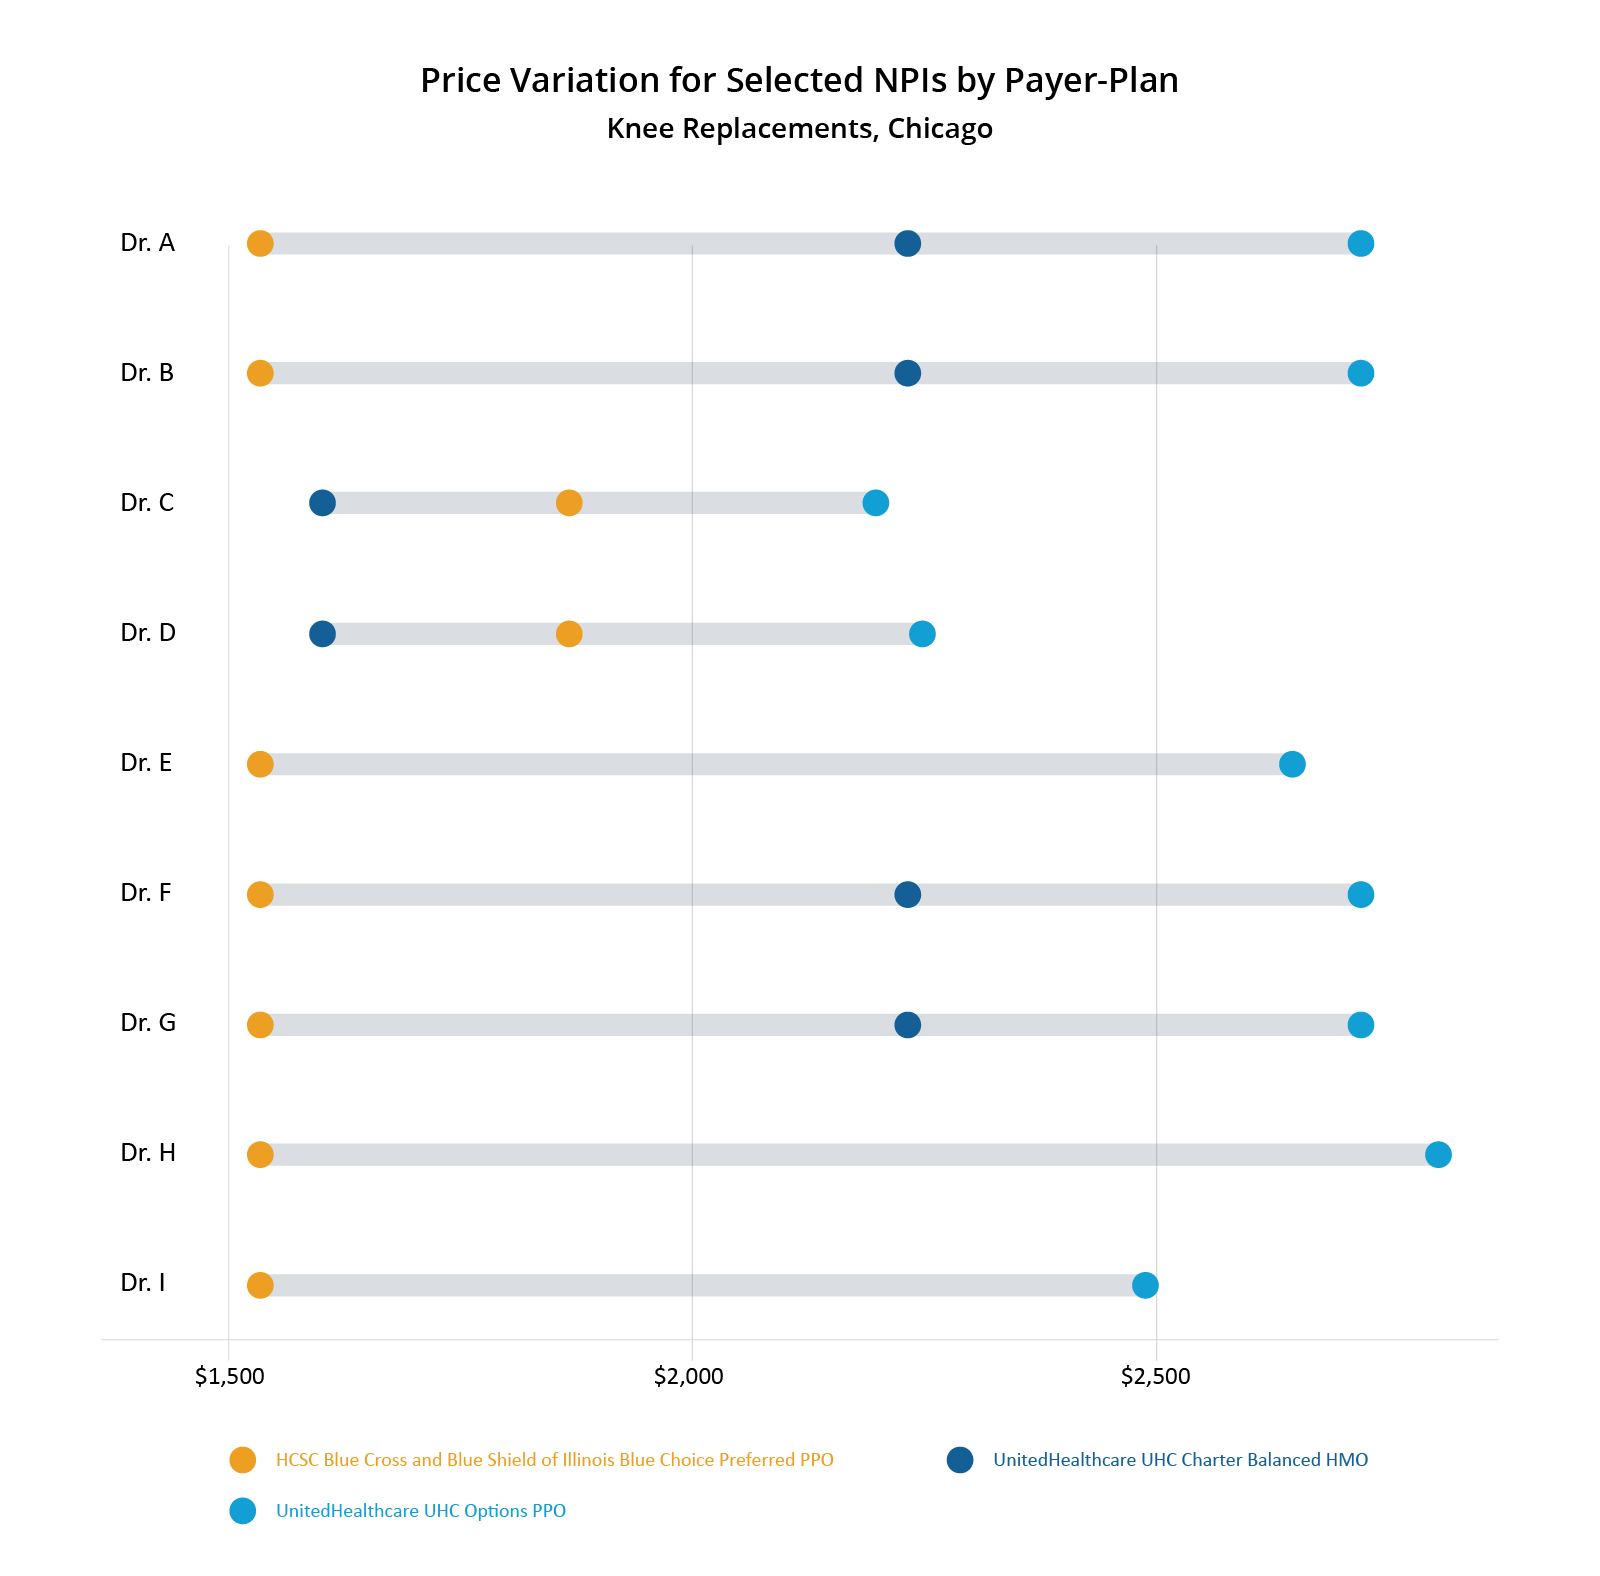 Price Variation for Selected NPIs by Payer-Plan